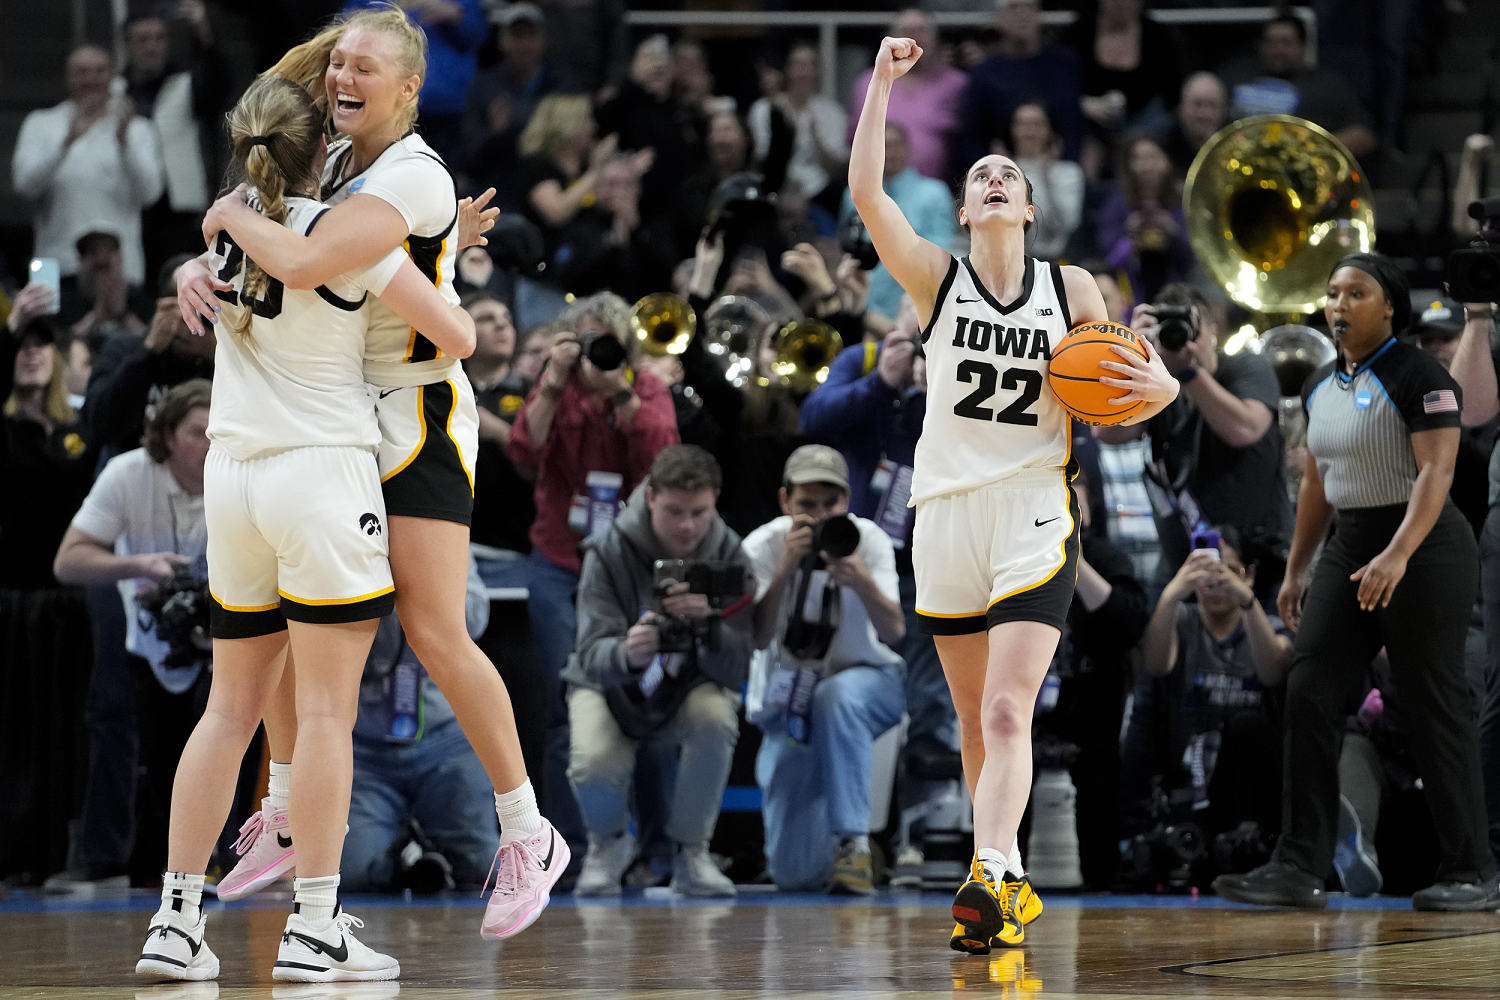 Caitlin Clark leads Iowa past defending champion LSU to advance to Final Four